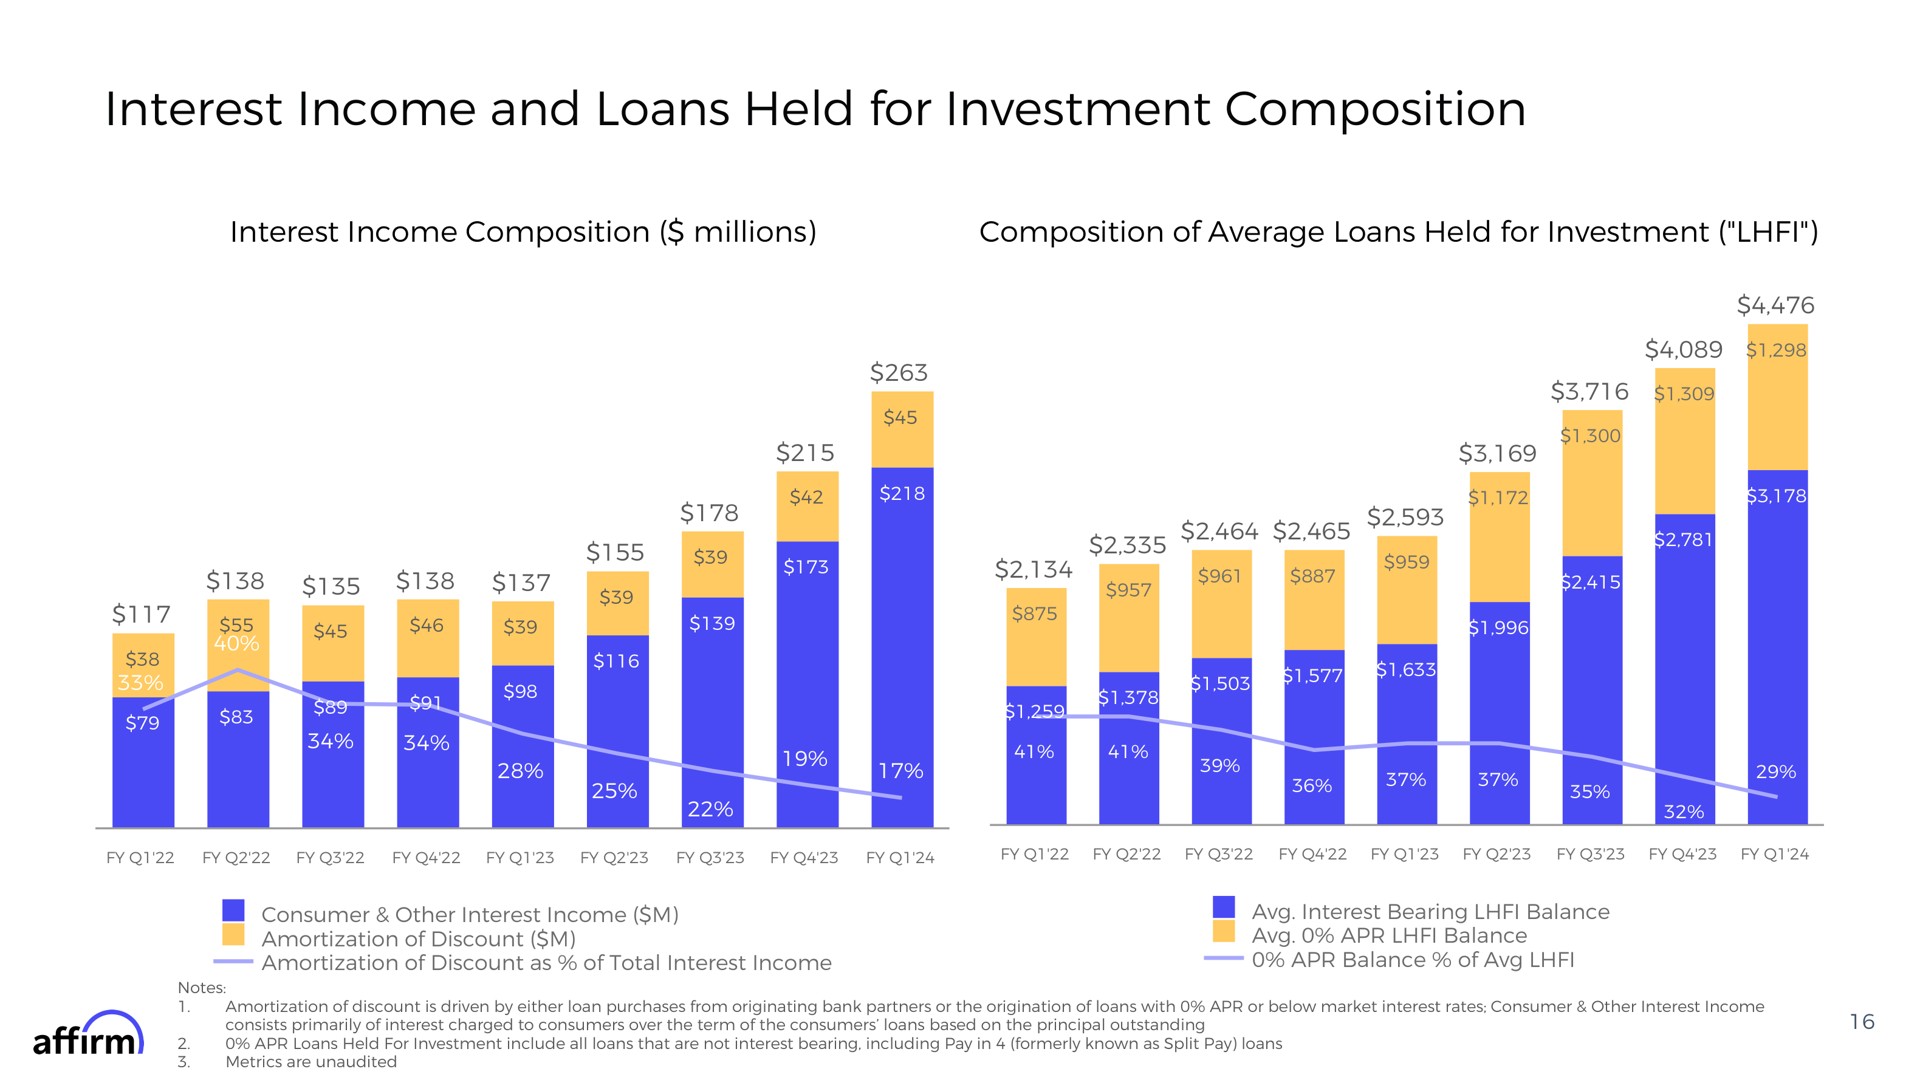 interest income and loans held for investment composition interest income composition millions composition of average loans held for investment we pee a eer affirm | Affirm